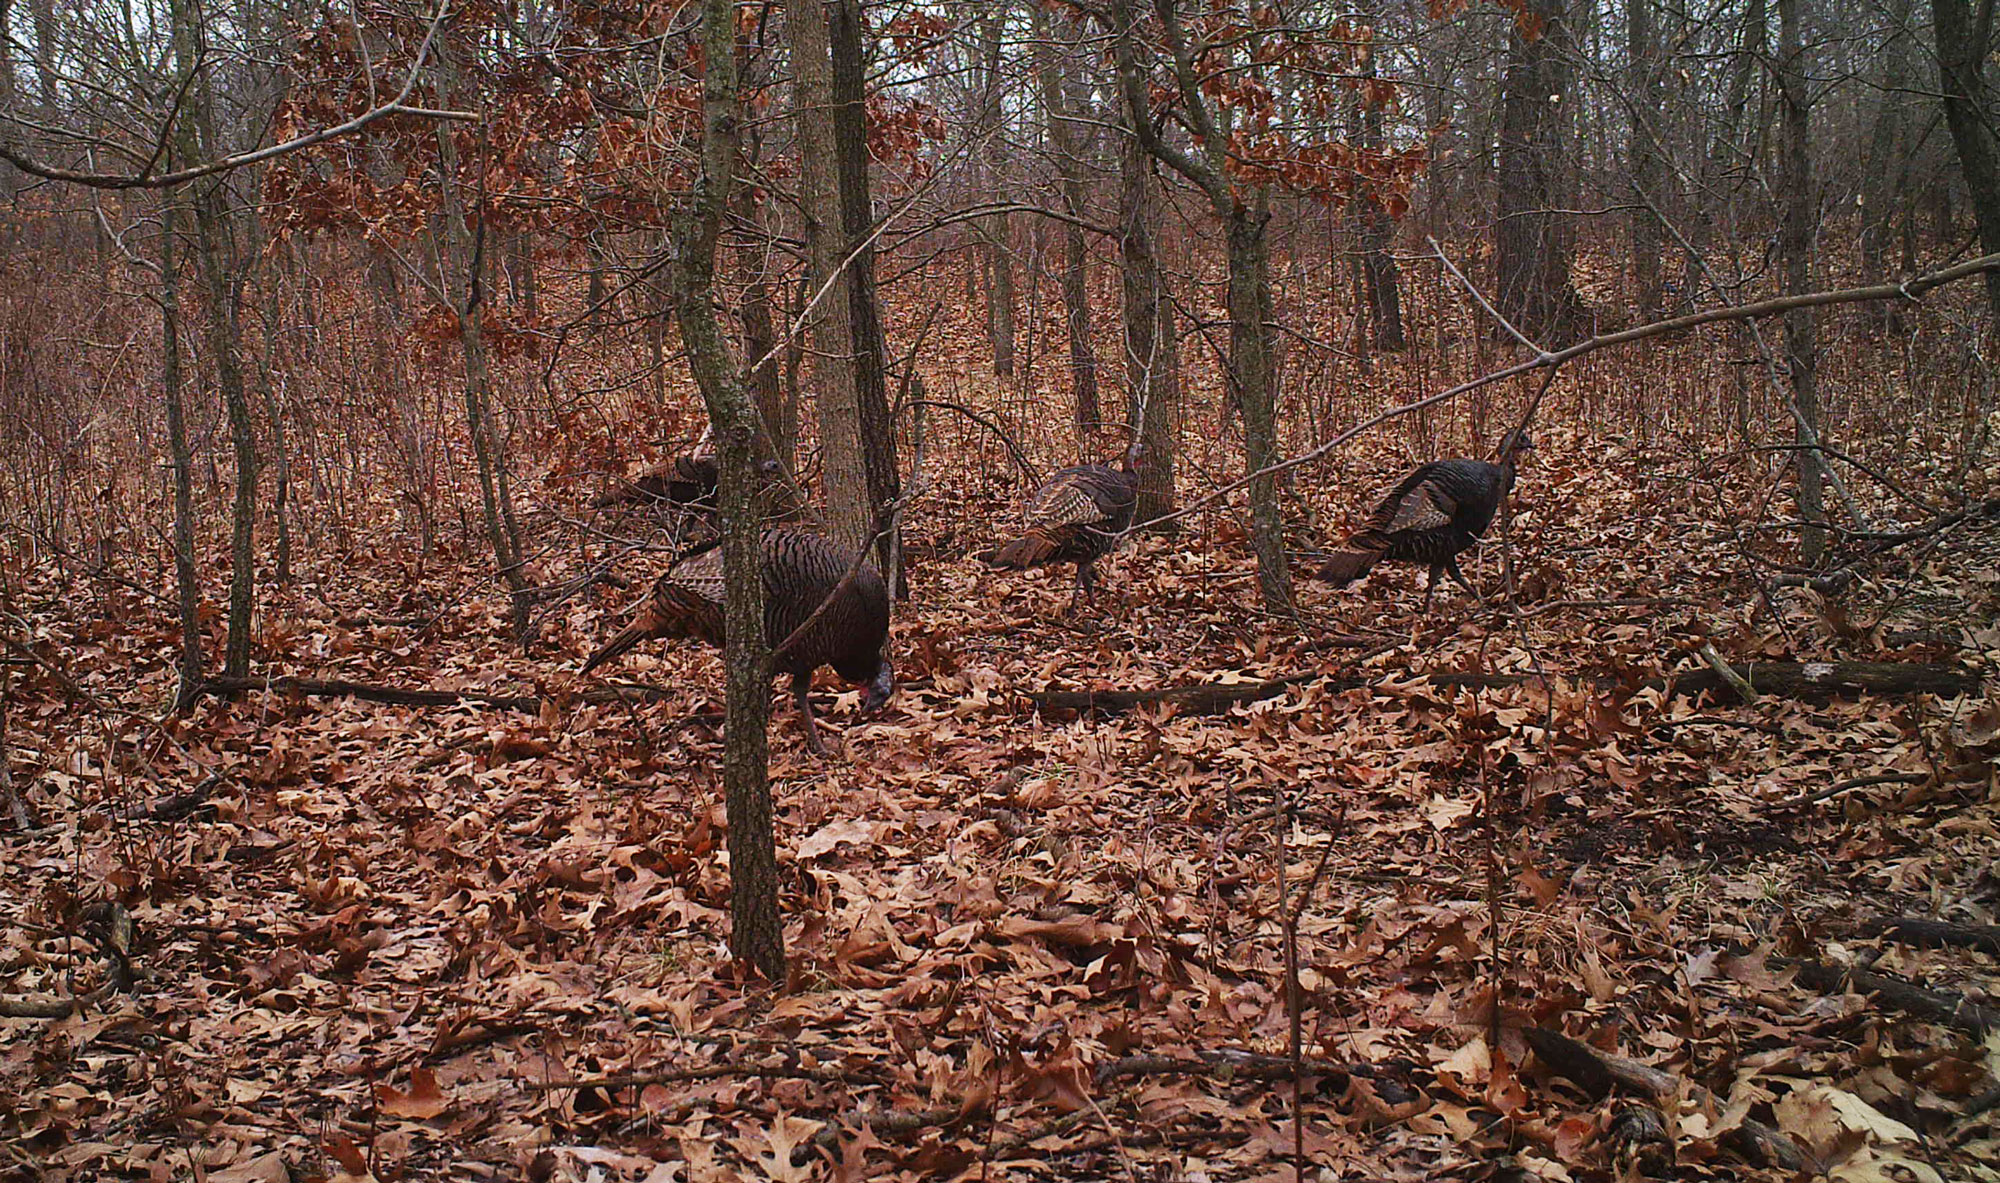 A group of wild turkeys spotted on a trail camera.